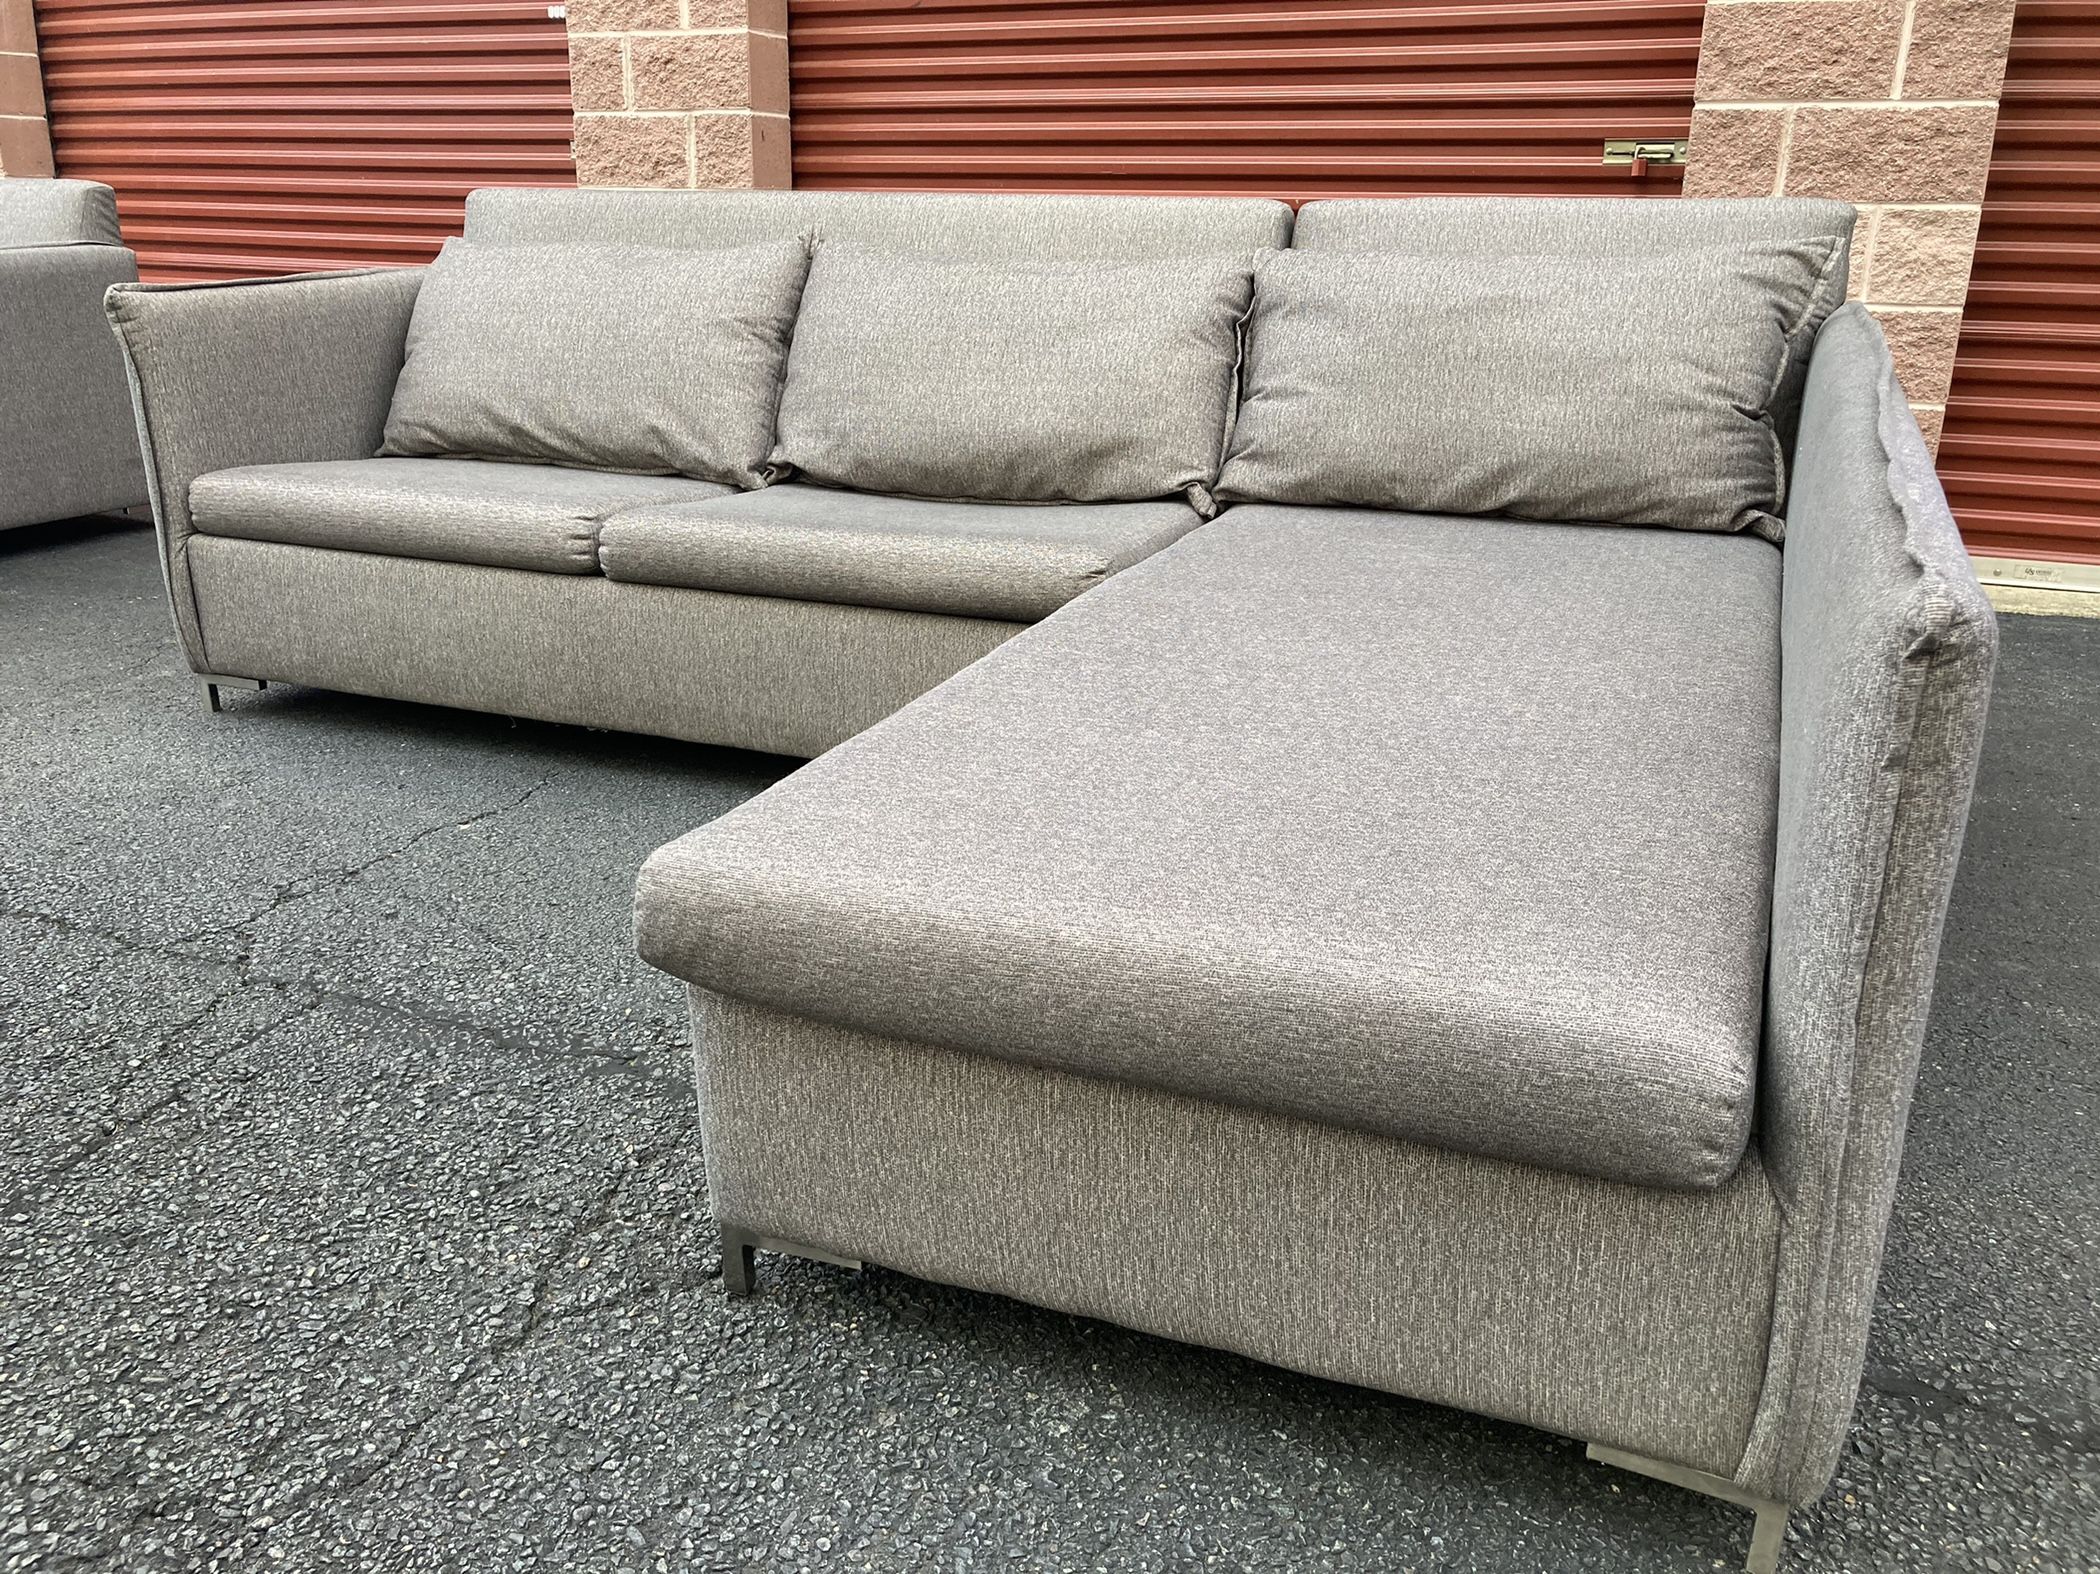 Sectional Sleeper Sofa - With Delivery